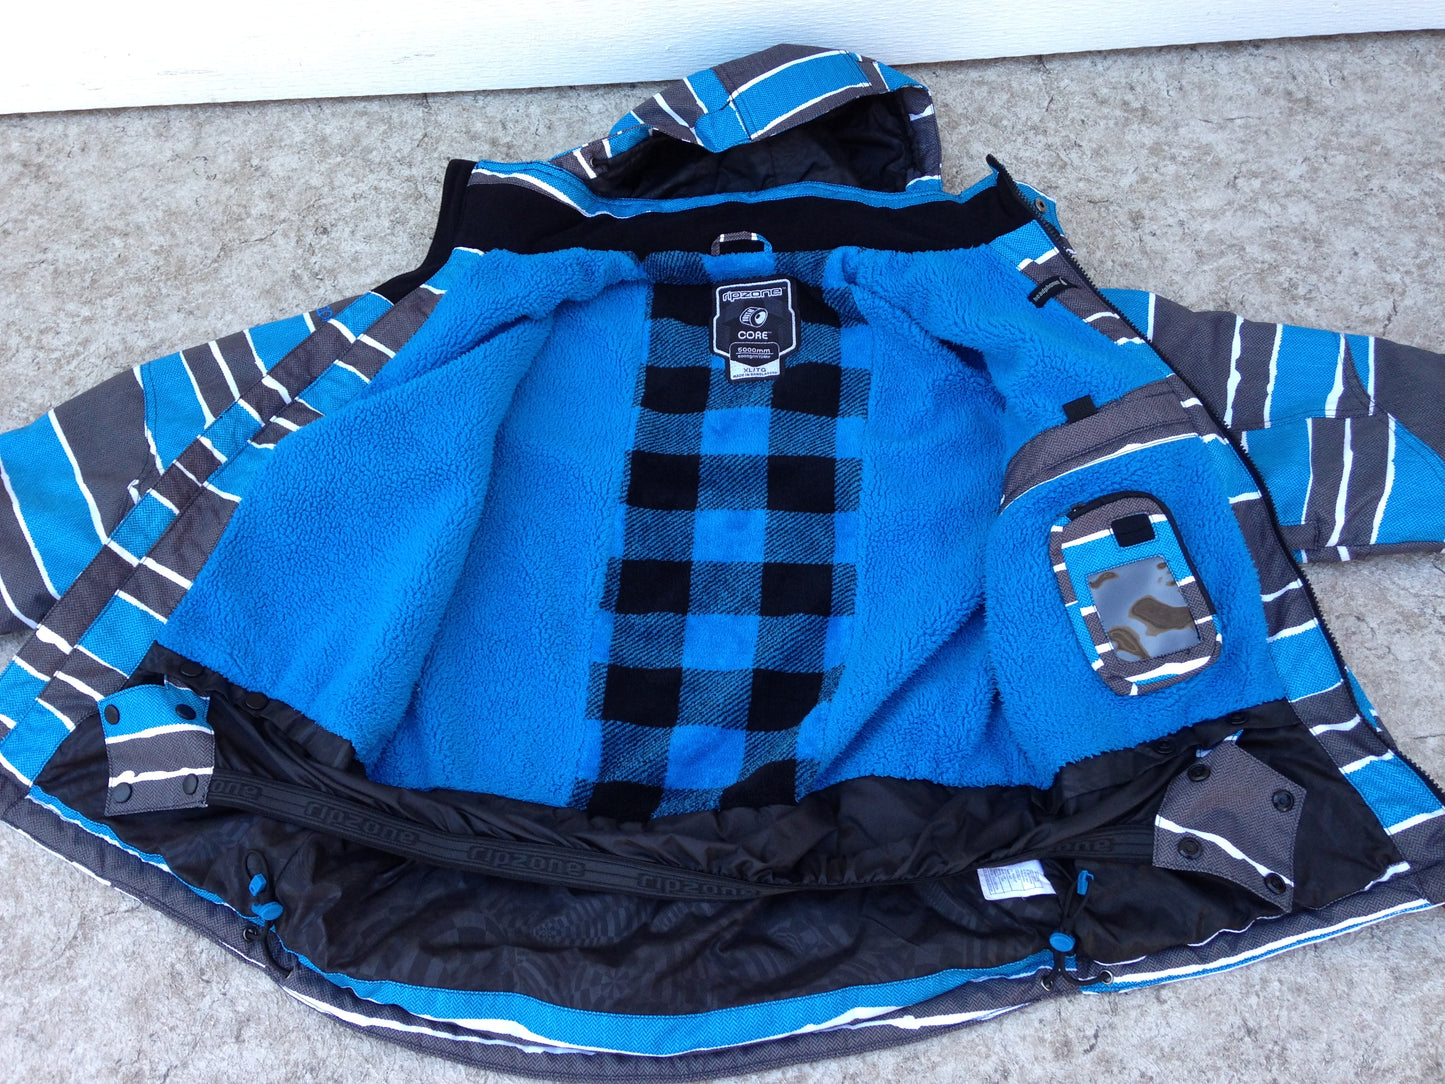 Winter Coat Child Size 14-16 Youth Ripxone Snowboarding Blue Grey With Snow Belt New Demo Model